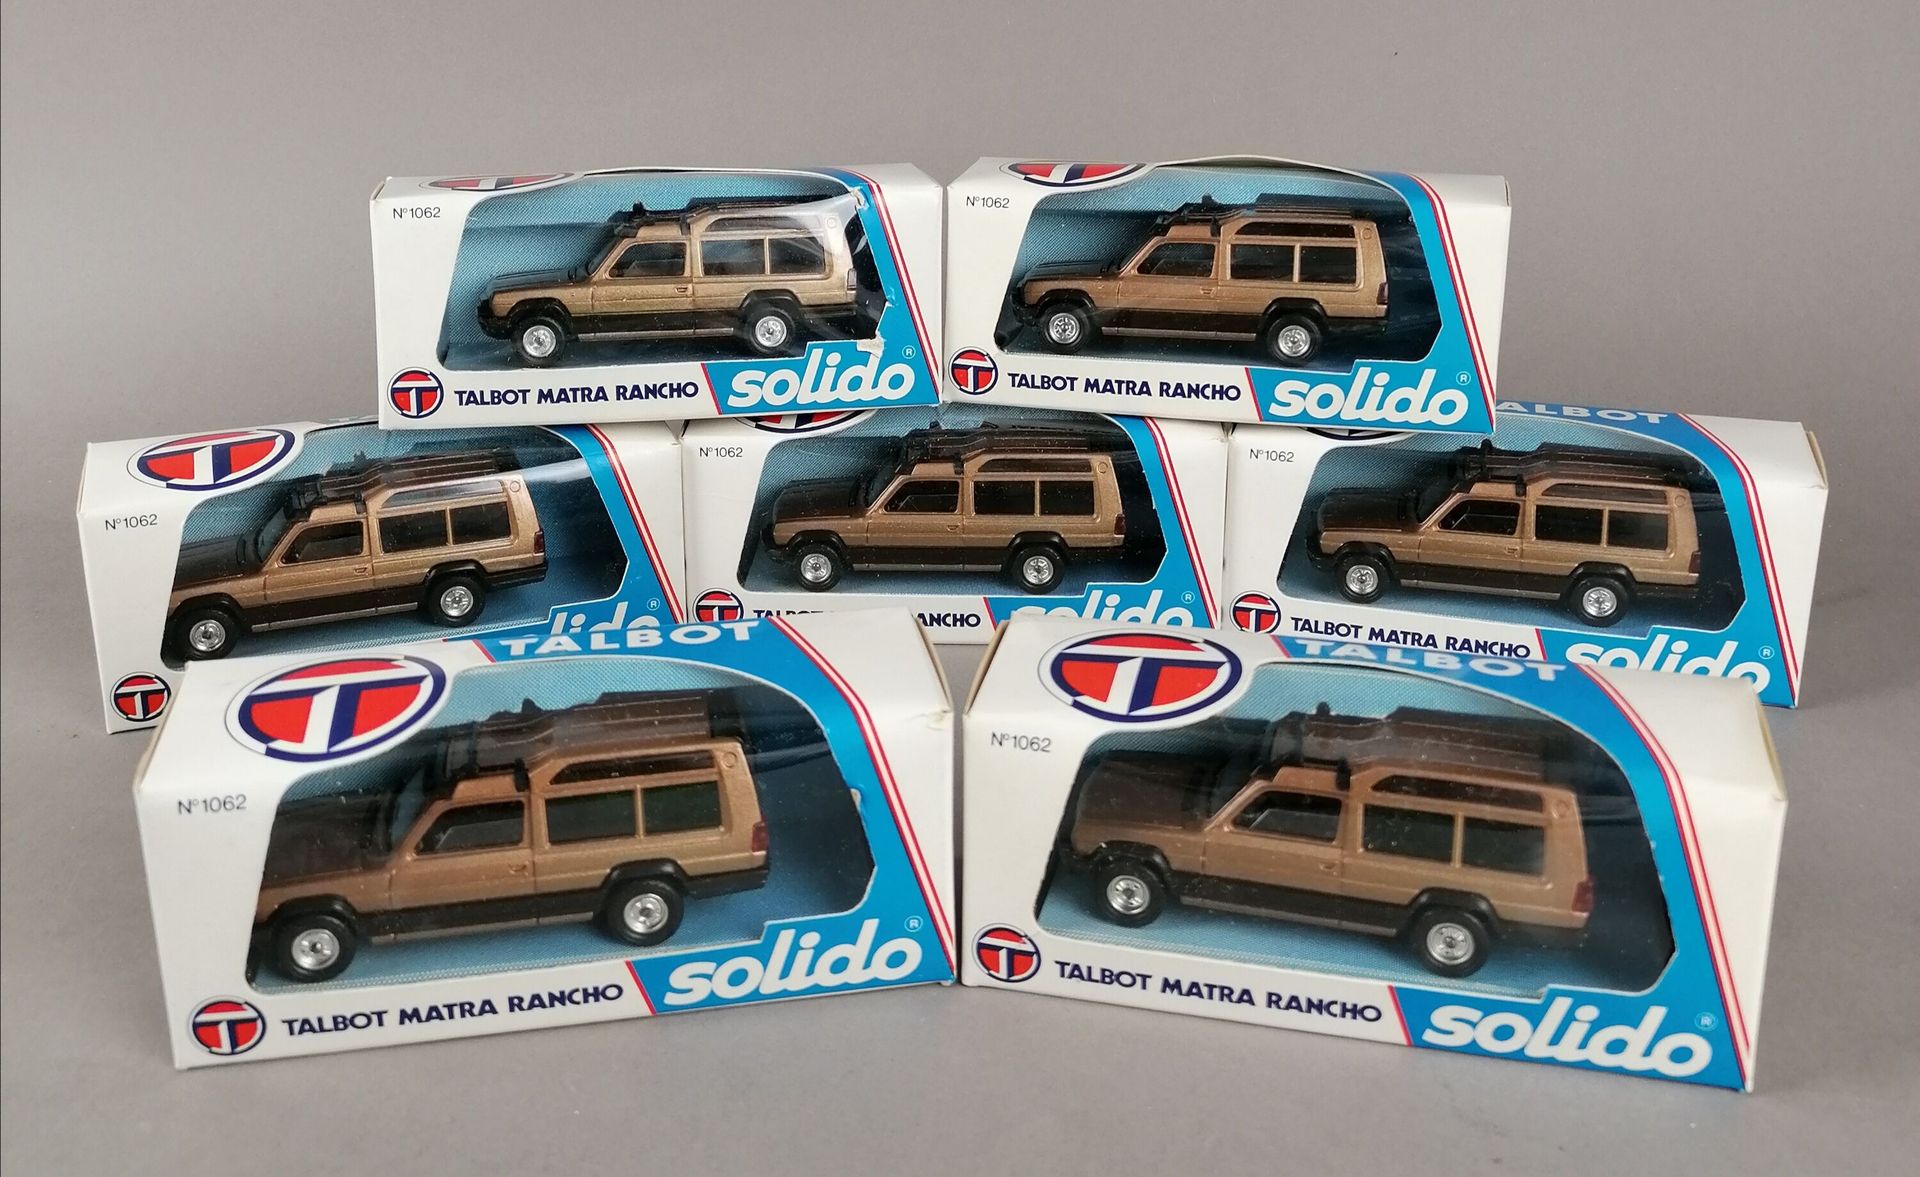 Null SOLIDO -17 Talbot Matra Rancho n°1062 scale 1/43 in their original boxes